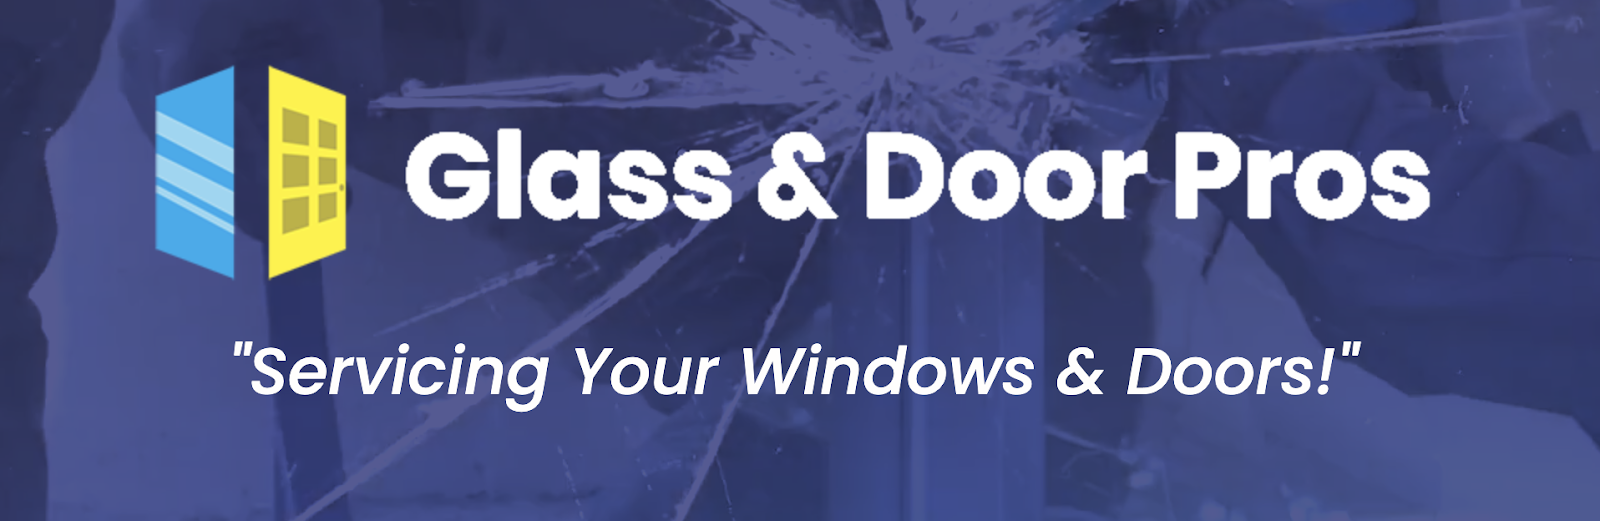 Glass & Door Pros offers quality glass, door, mirror, and hardware services to the San Antonio and Austin areas 1